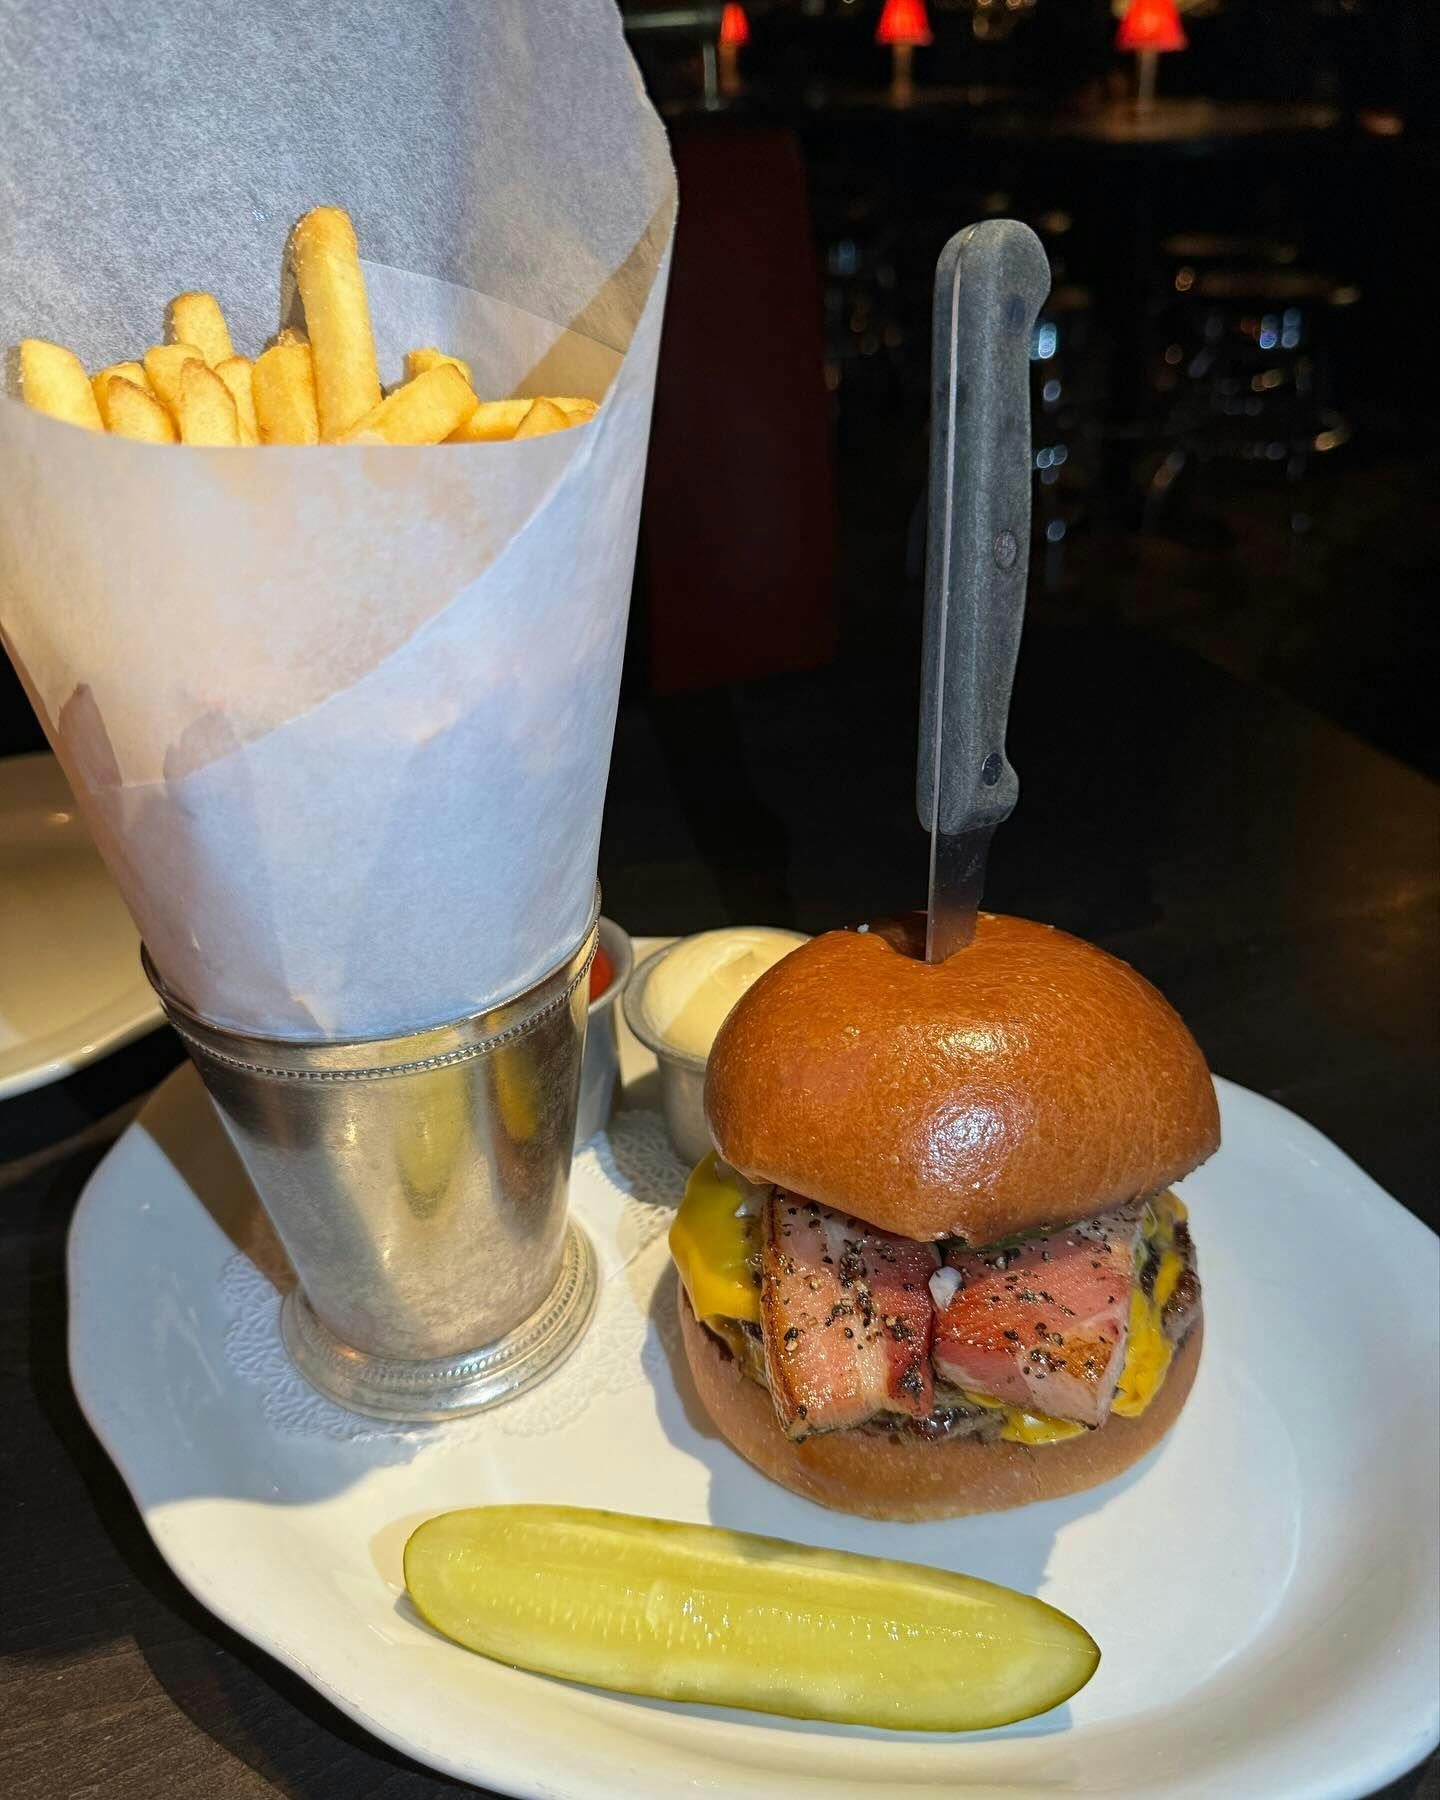 A gourmet burger with a perfectly seared patty and melty cheese on a brioche bun, accompanied by a cone of golden fries and a crisp pickle, ready to be enjoyed in one of New York's premium dining establishments available through Booked.